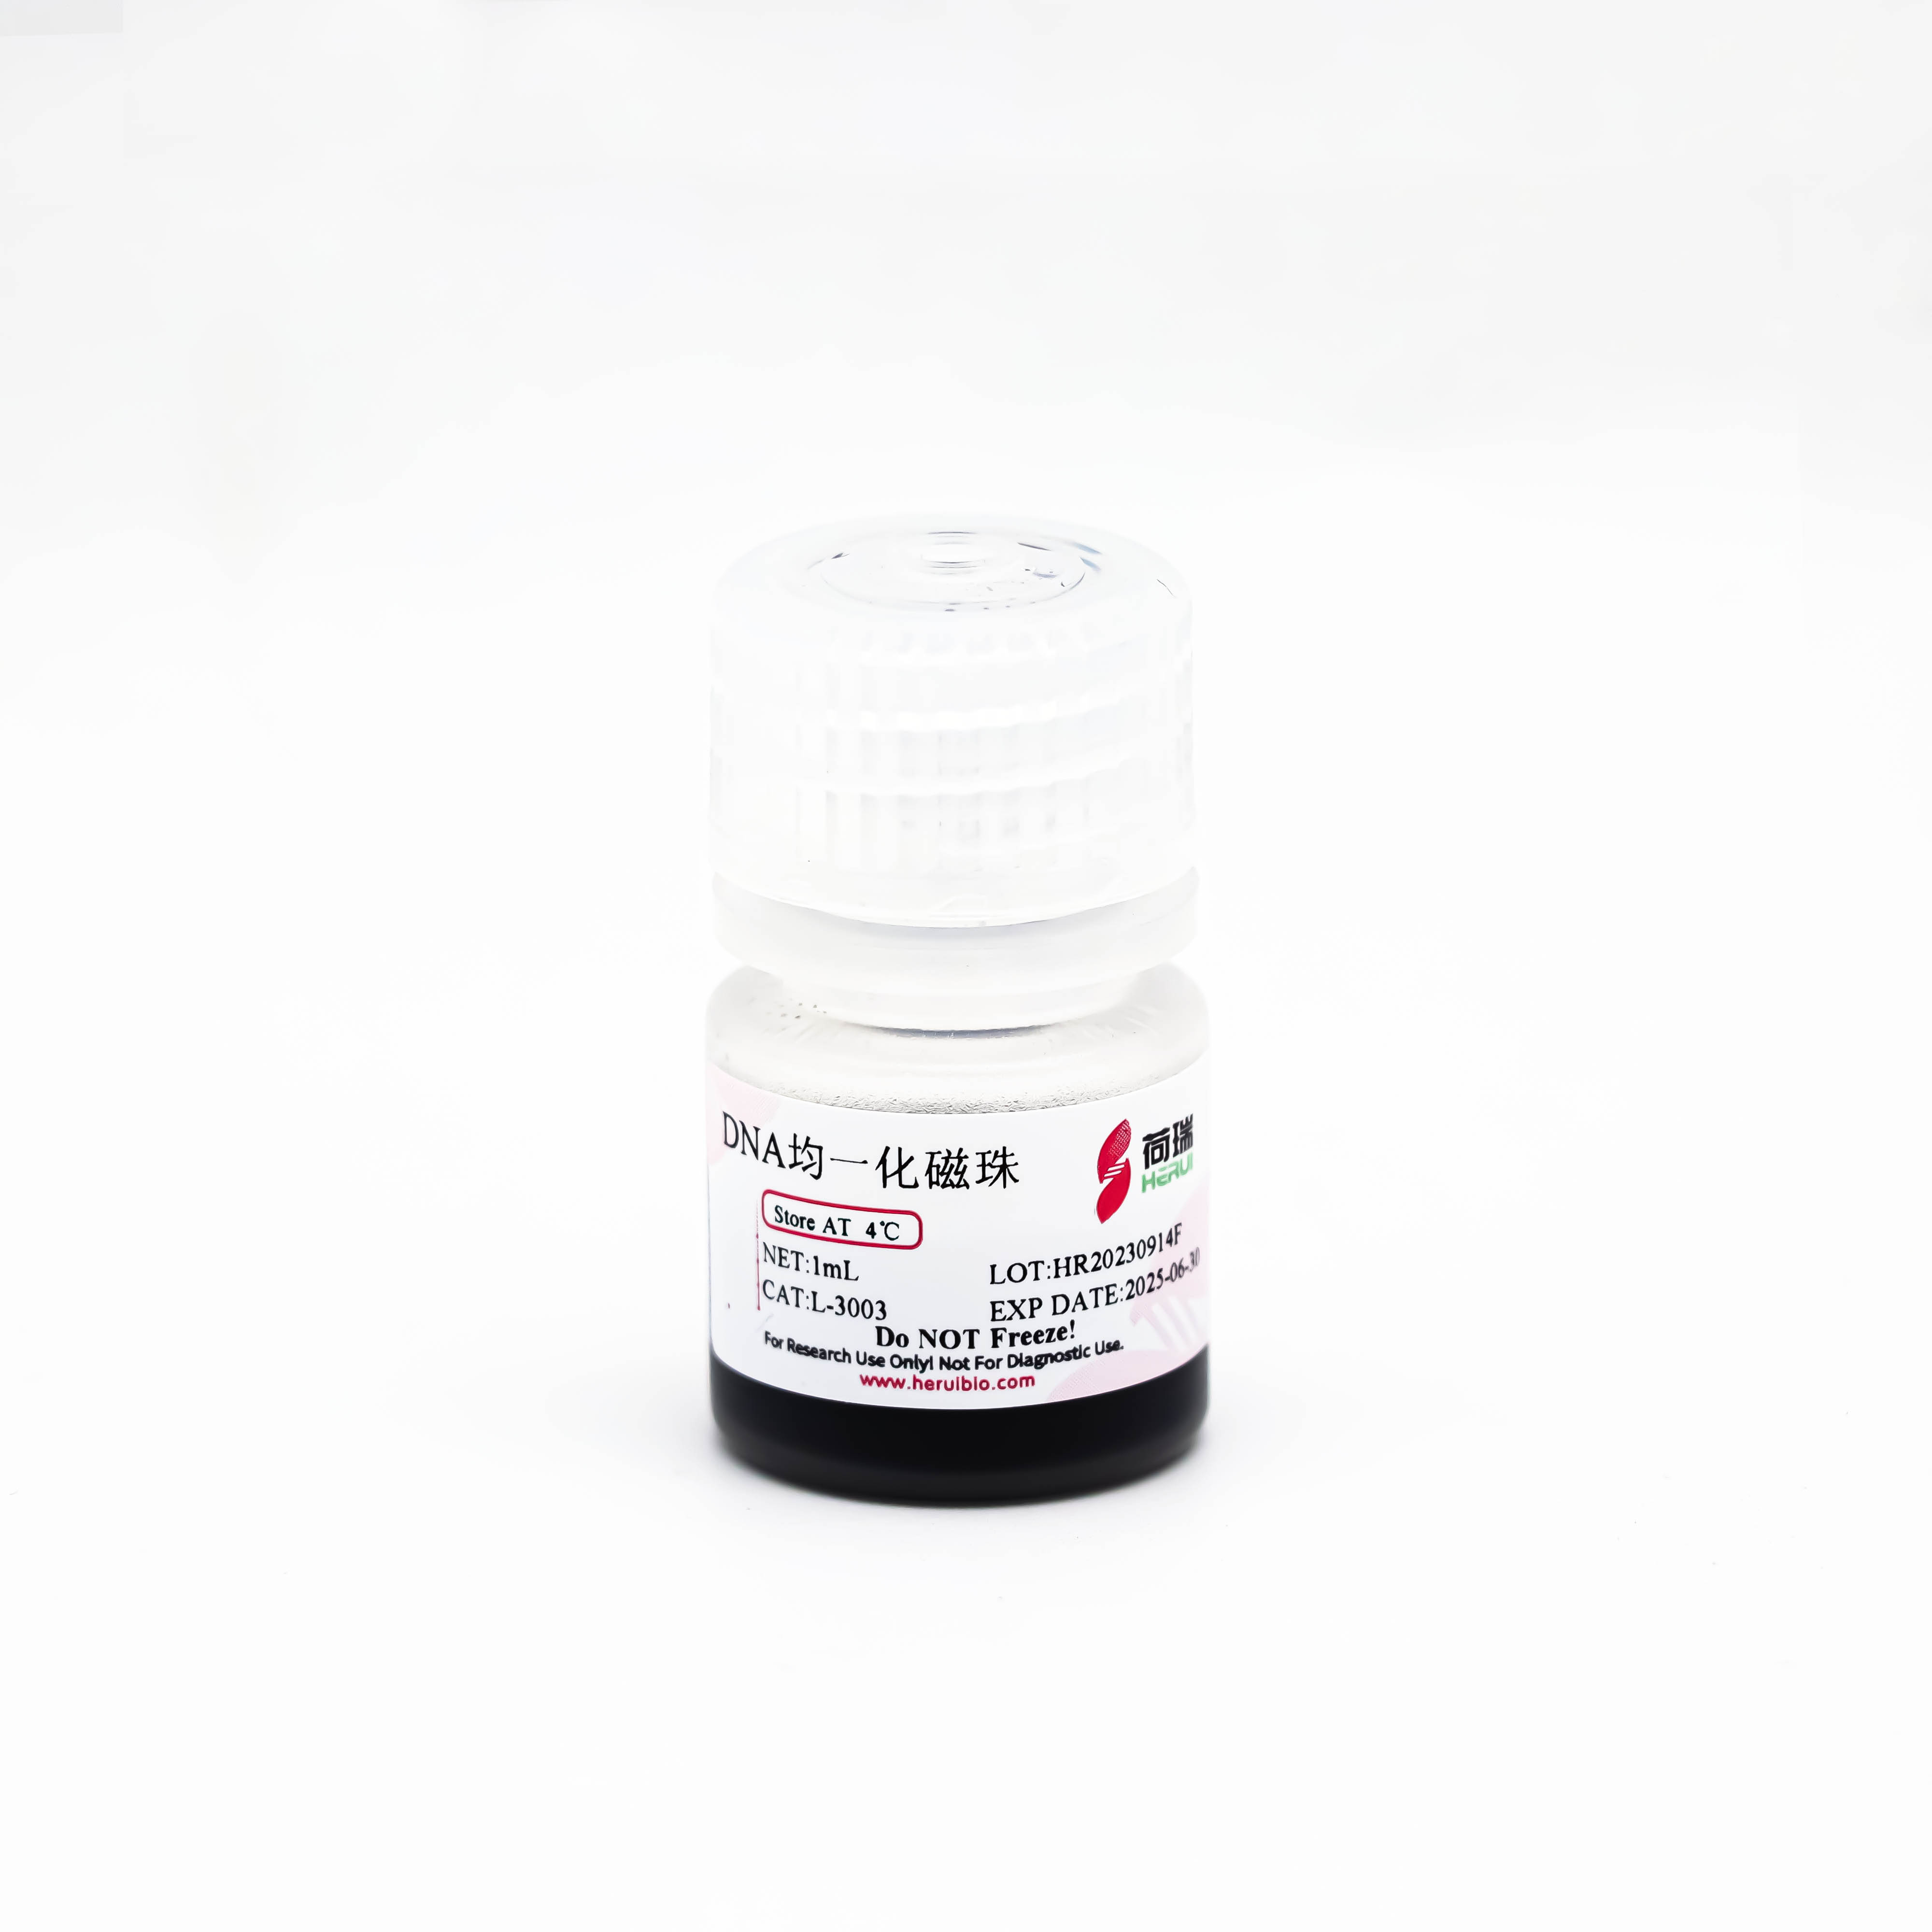 DNA Normalizer Magnetic Beads DNA均一化磁珠